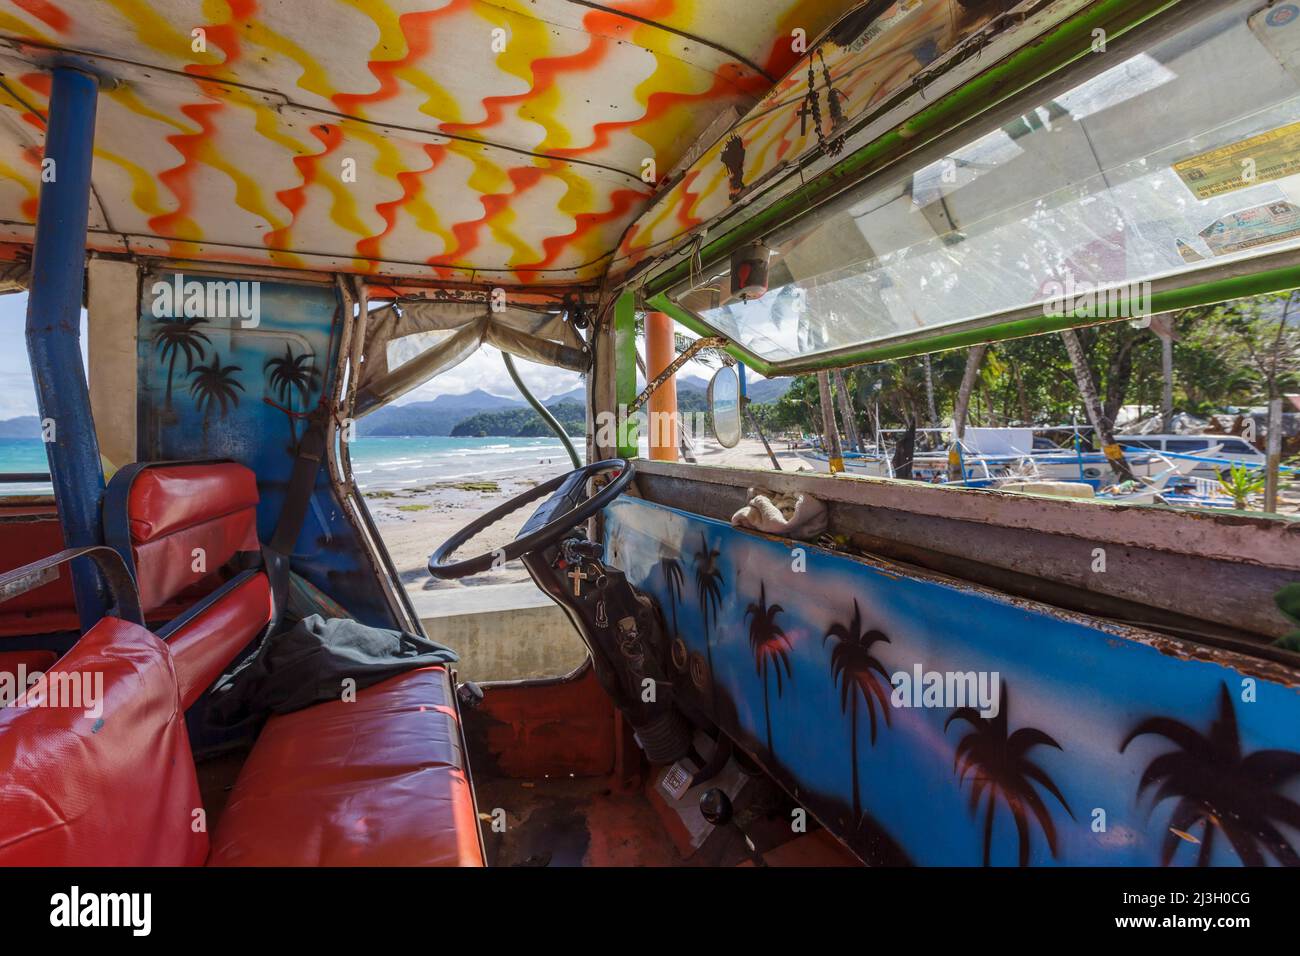 Philippines, Palawan, Sabang Beach, colorful interior of a jeepney on the sunny beach Stock Photo